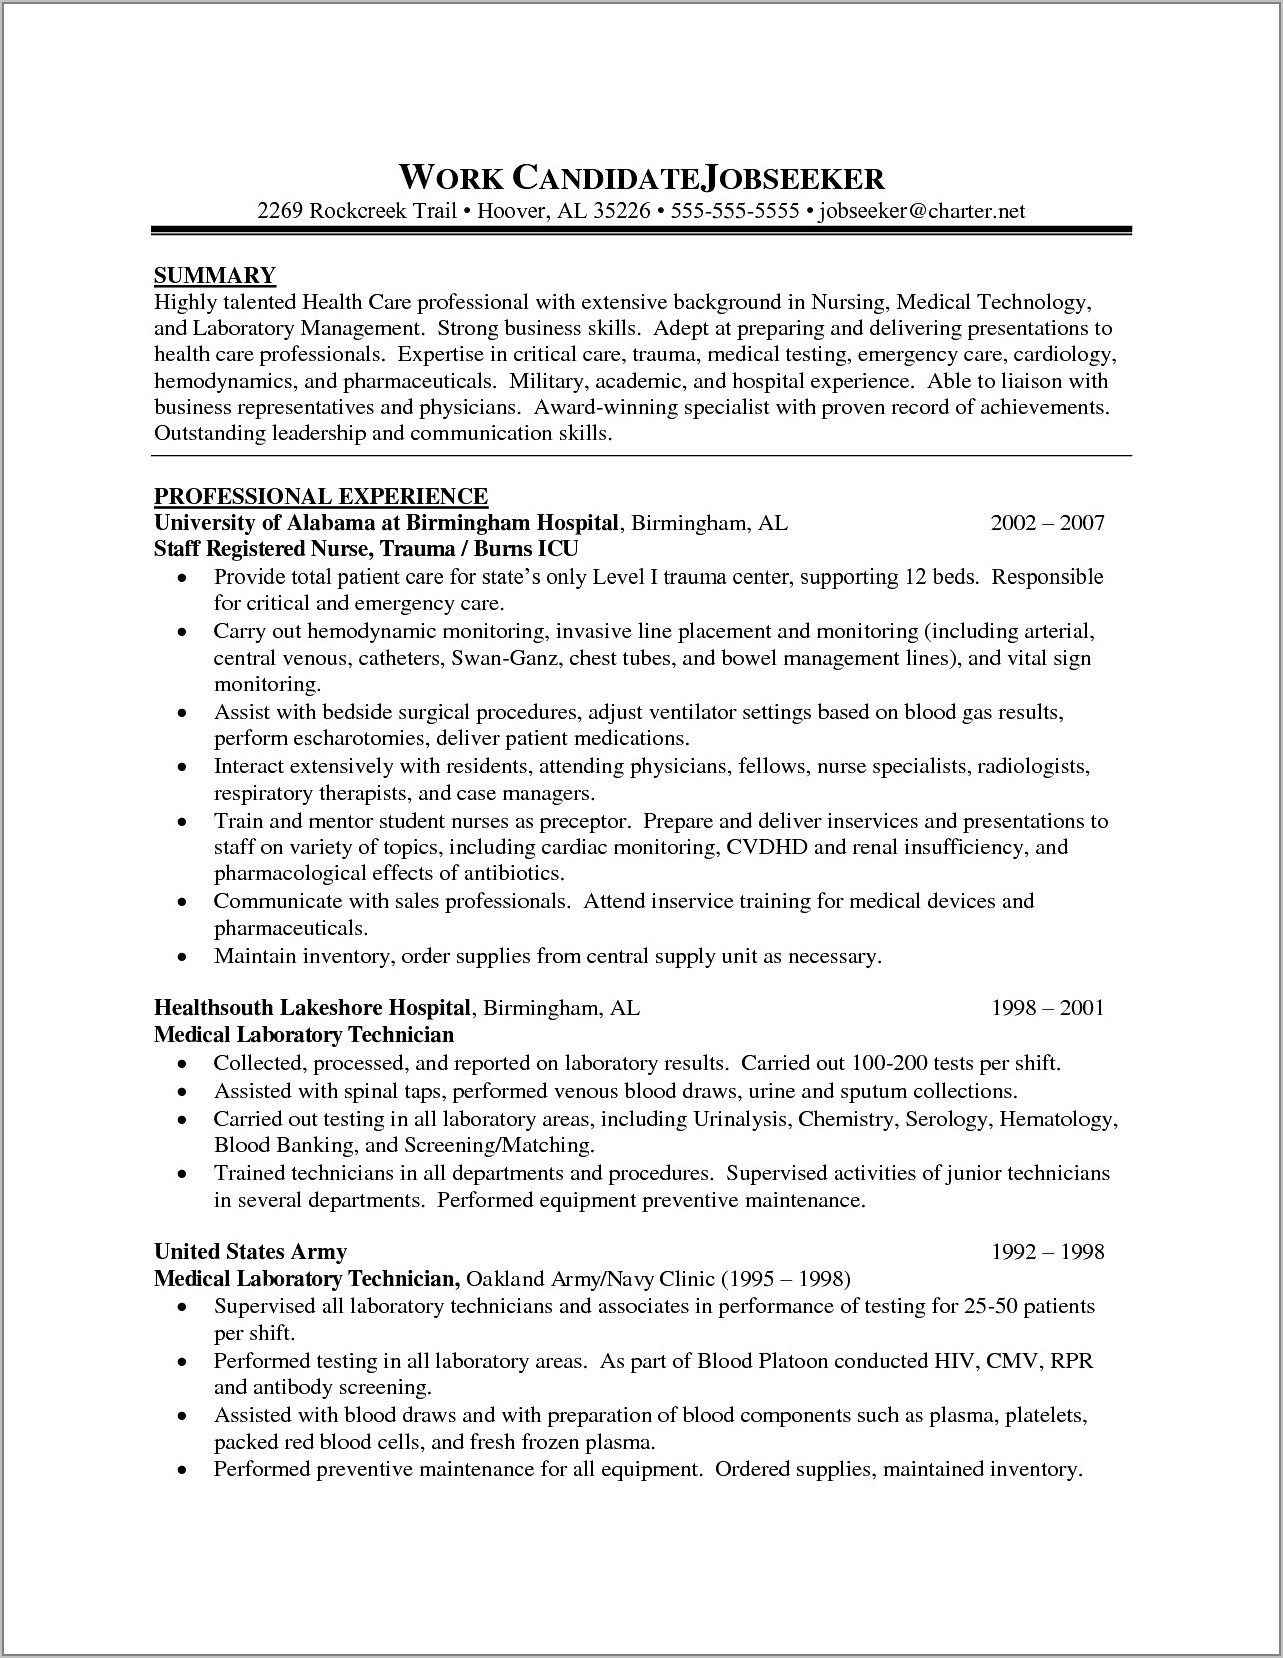 Professional Resume Samples For Banking Jobs